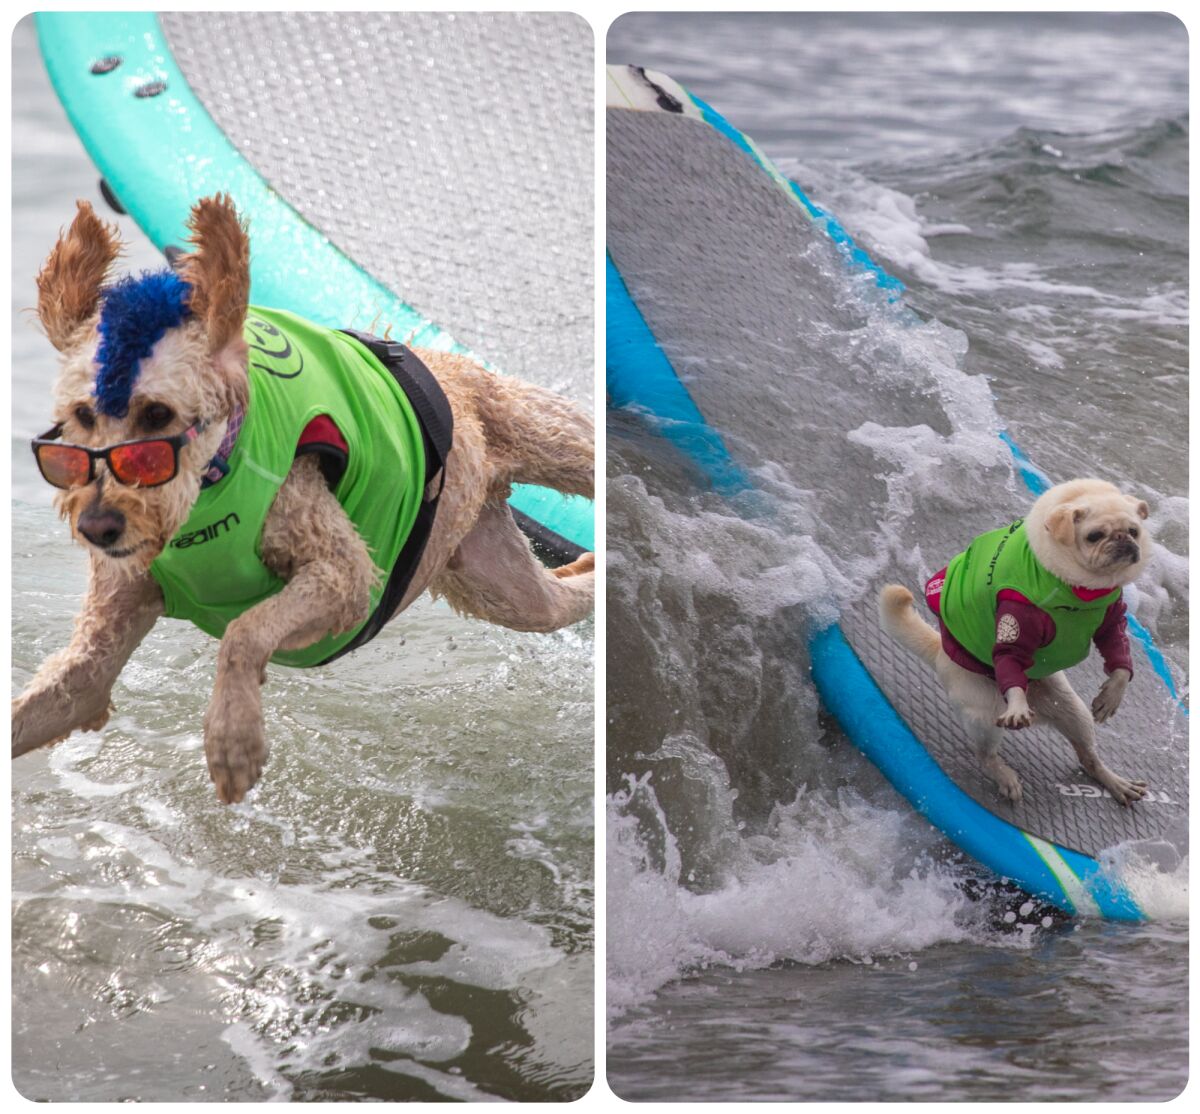 Dogs on surfboards.